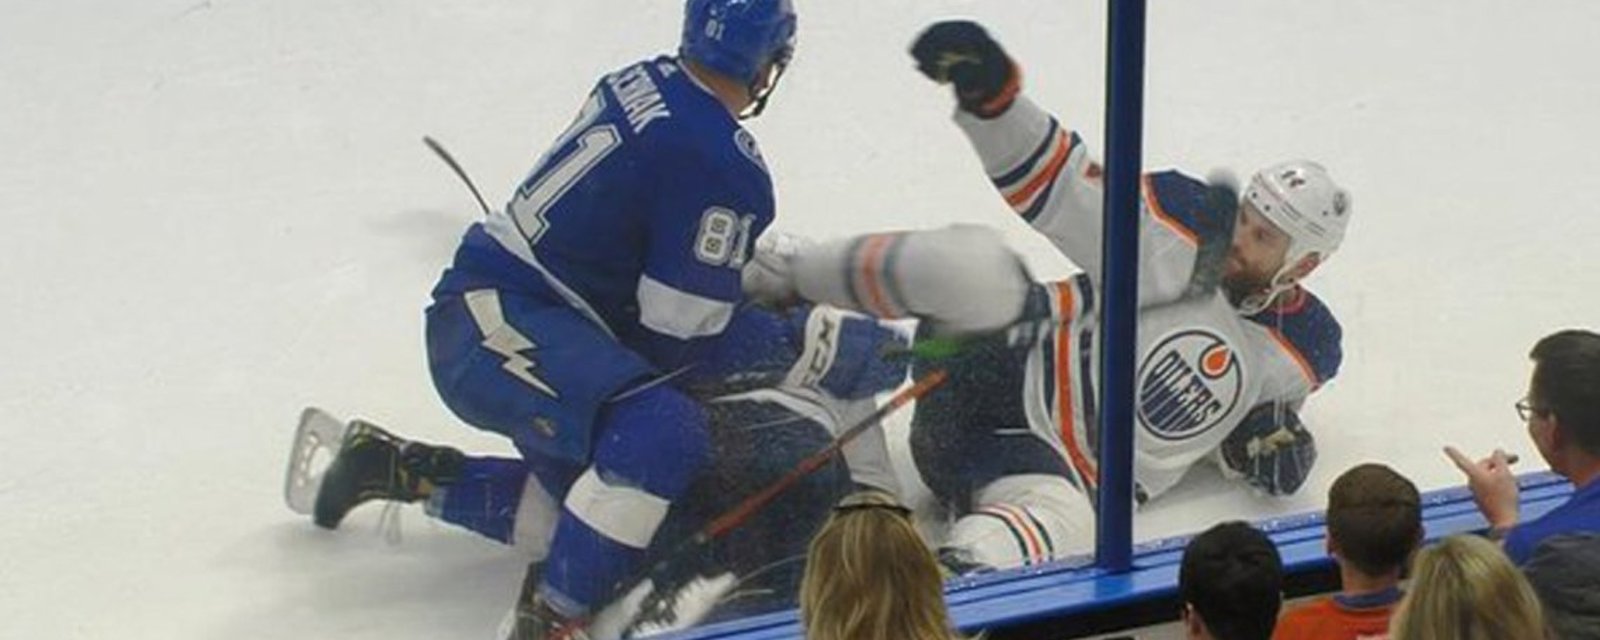 6-game or more suspension to Kassian for kicking Cernak right in the chest?